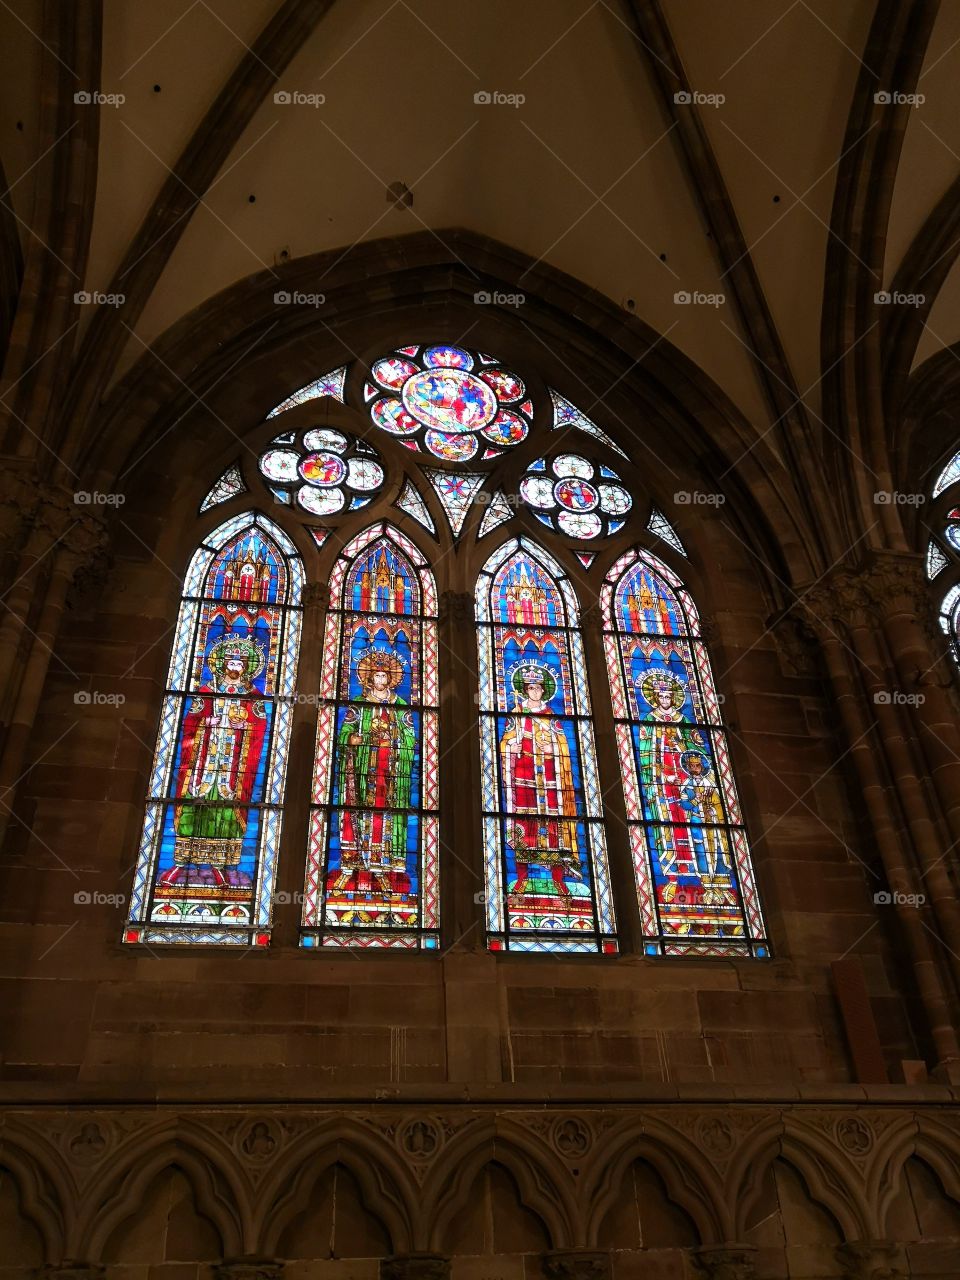 Window Stained Glass, Church, Strasbourg, France